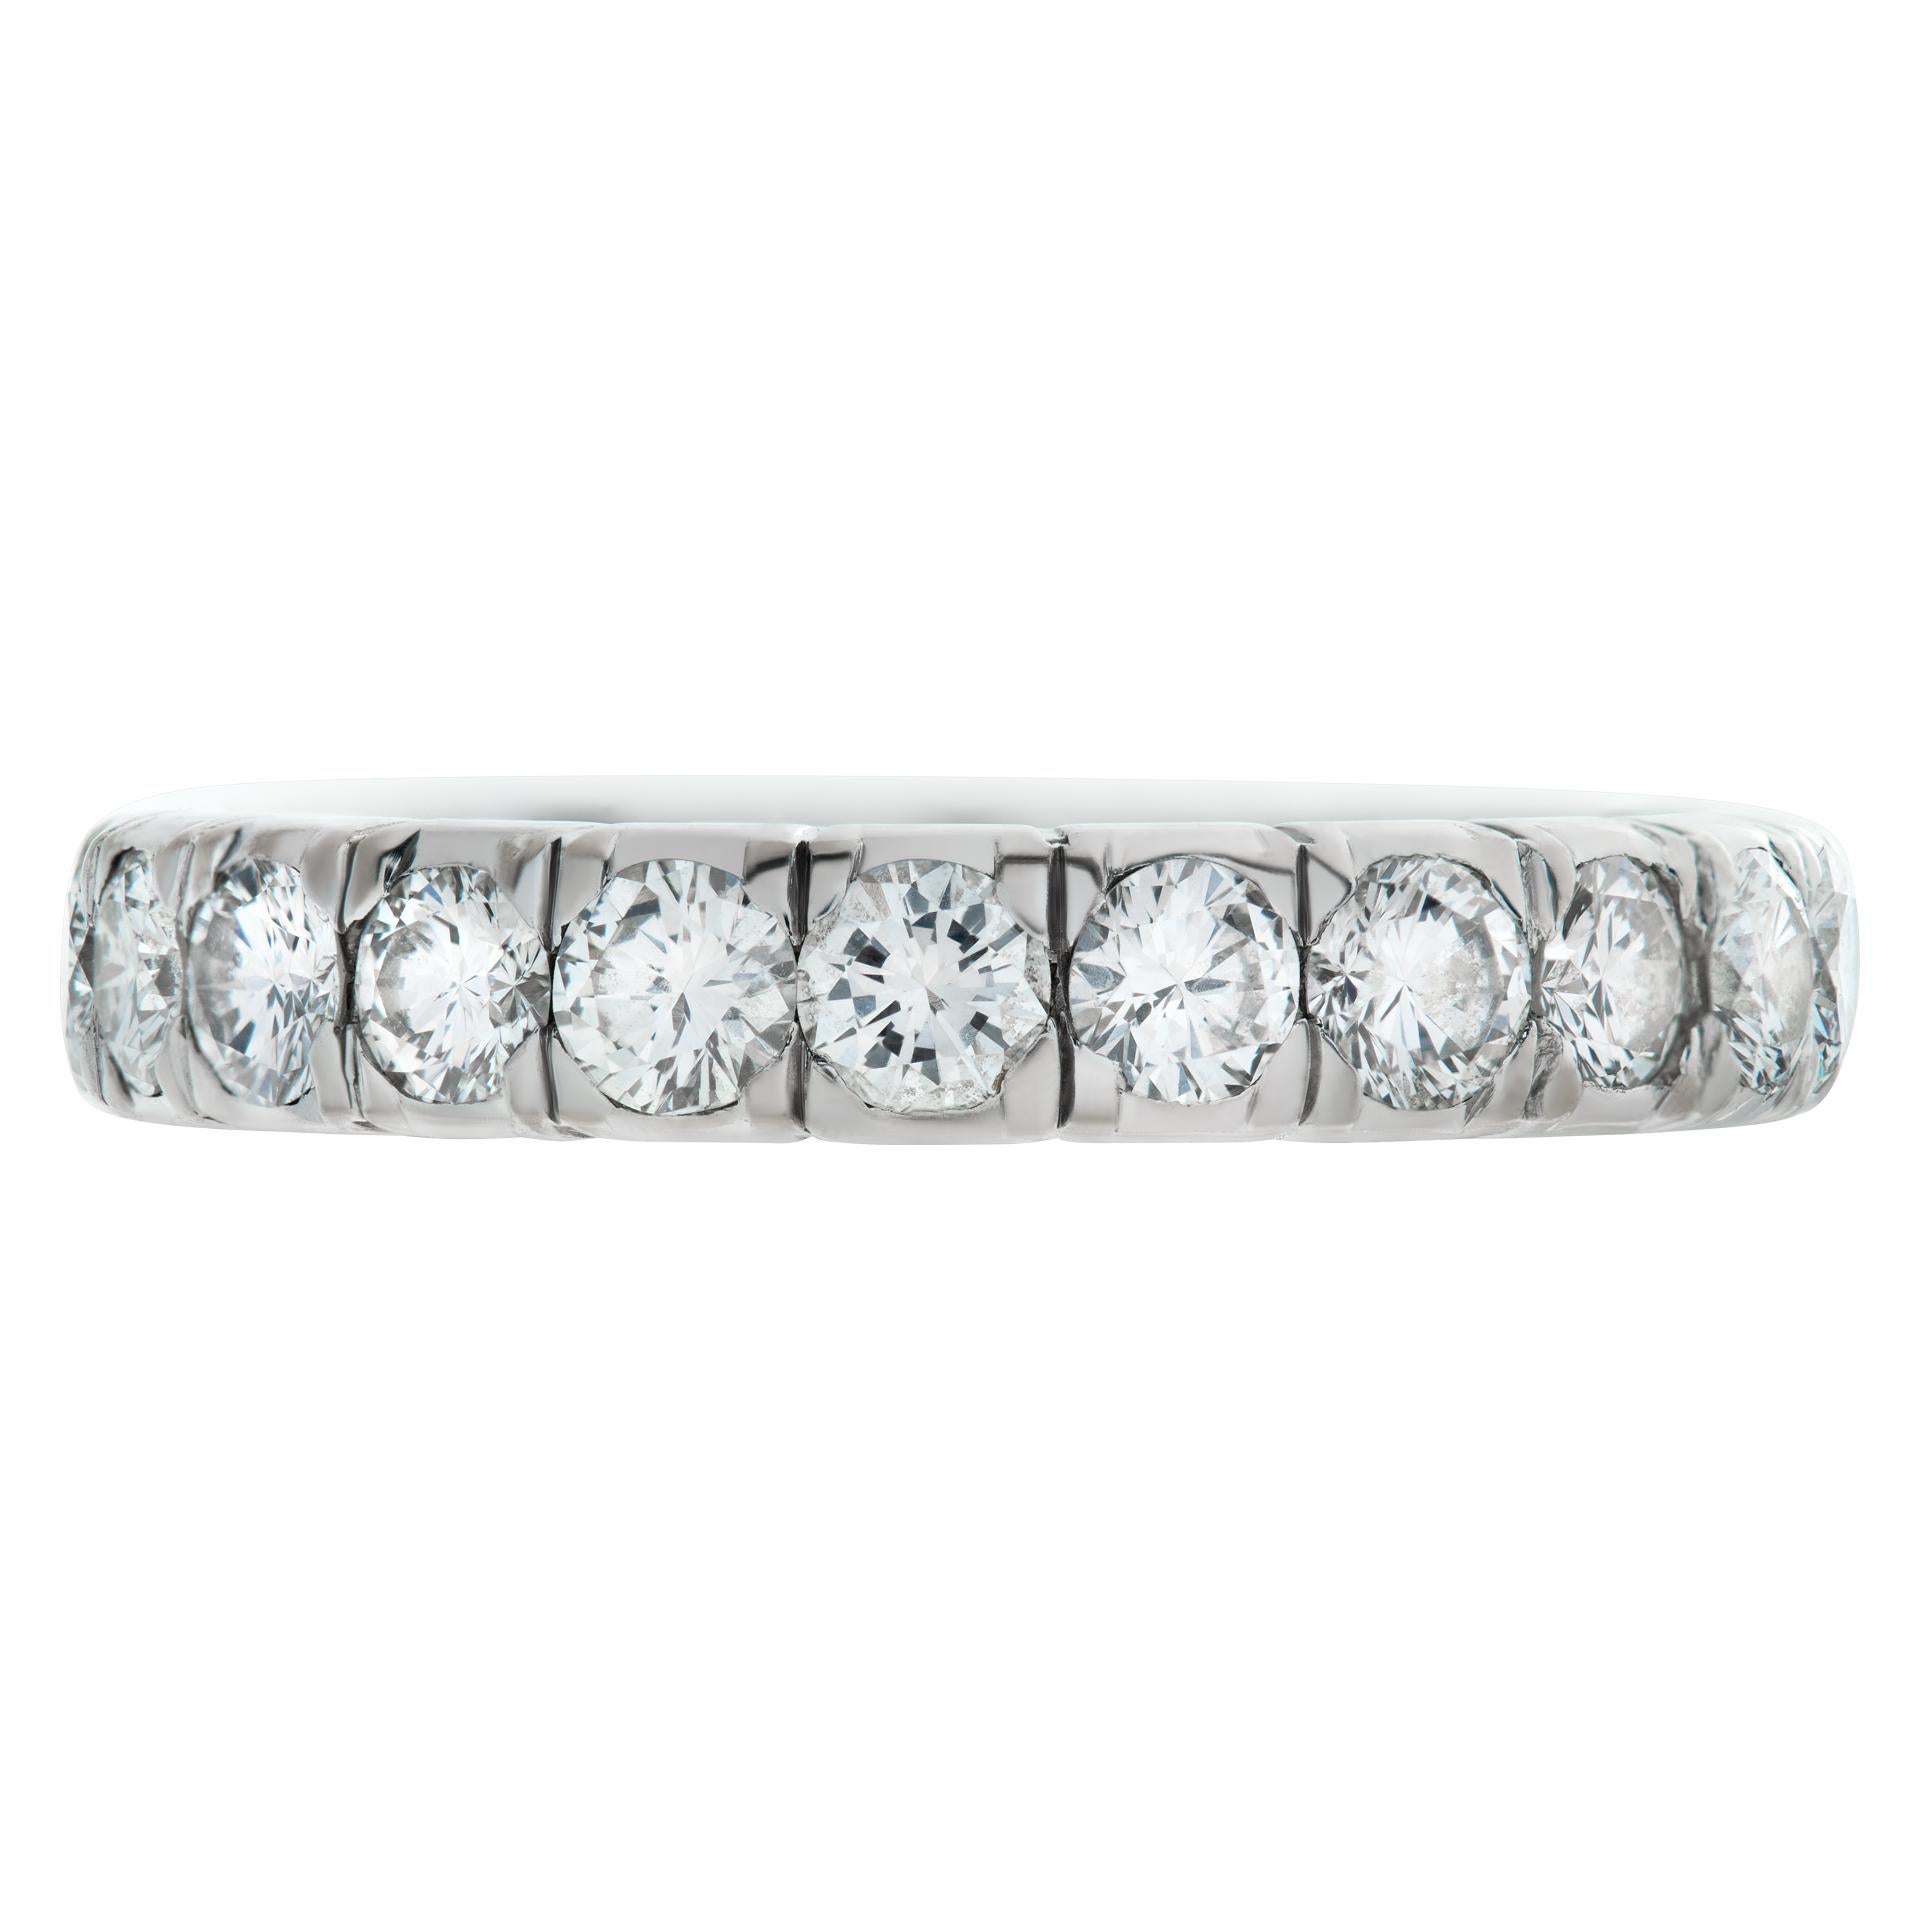 Stunning 18k white gold Eternity band with approximately 1.5 carats in G-H Color, VS Clarity round brilliant cut diamonds. Size 6, width 3mm.This Diamond ring is currently size 6 and some items can be sized up or down, please ask! It weighs 1.7